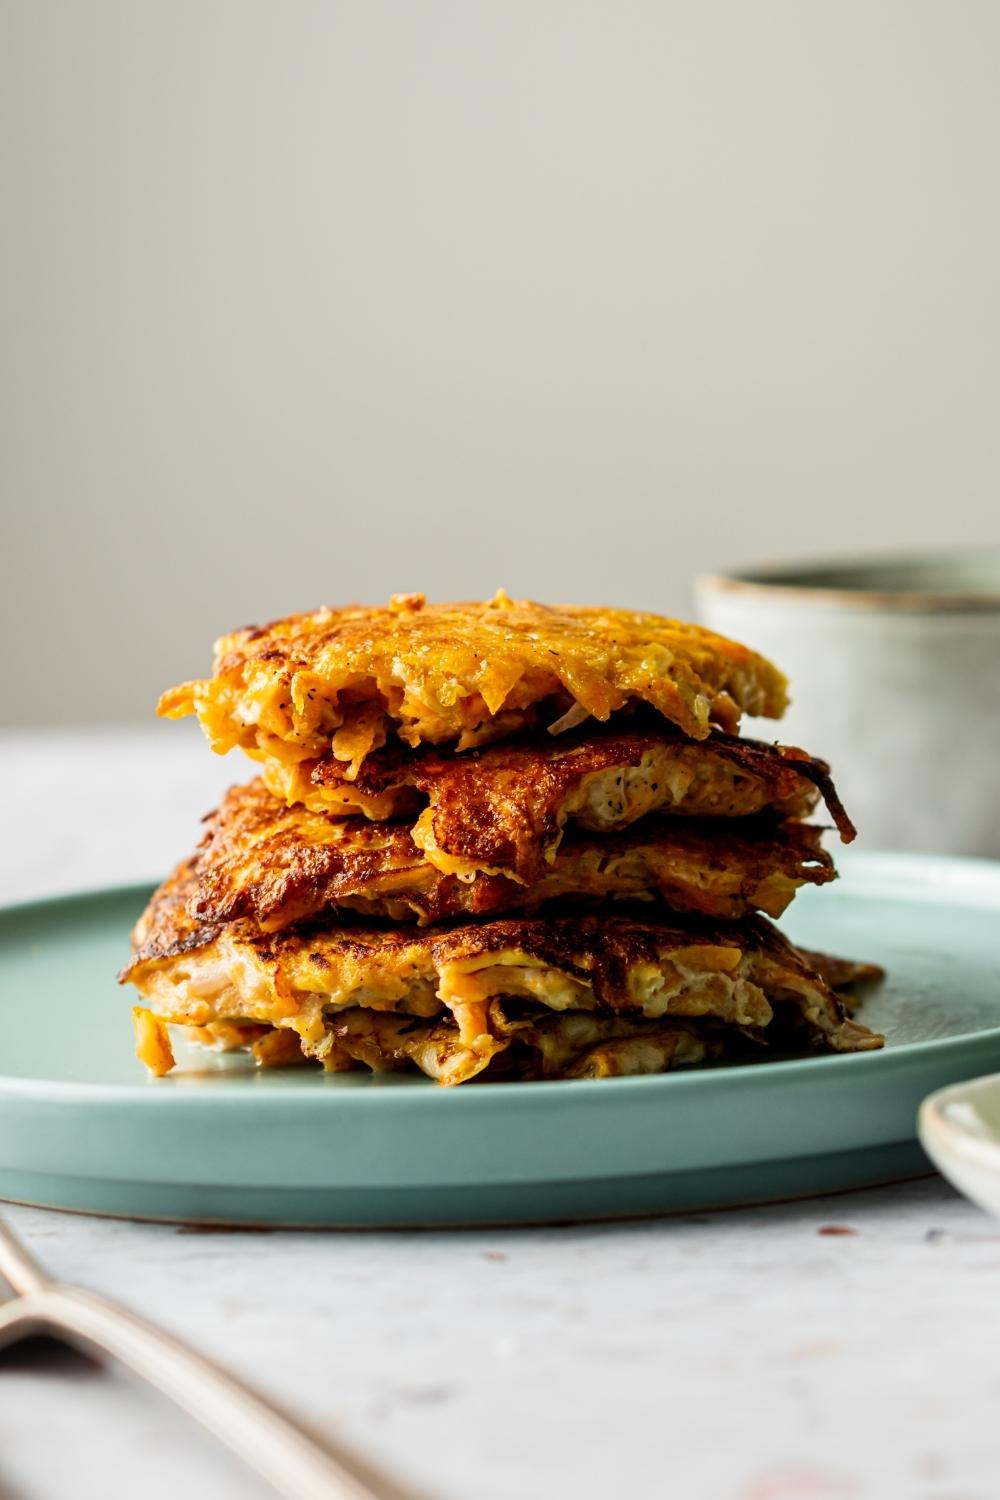 A stack of four sweet potato hash browns on a plate.